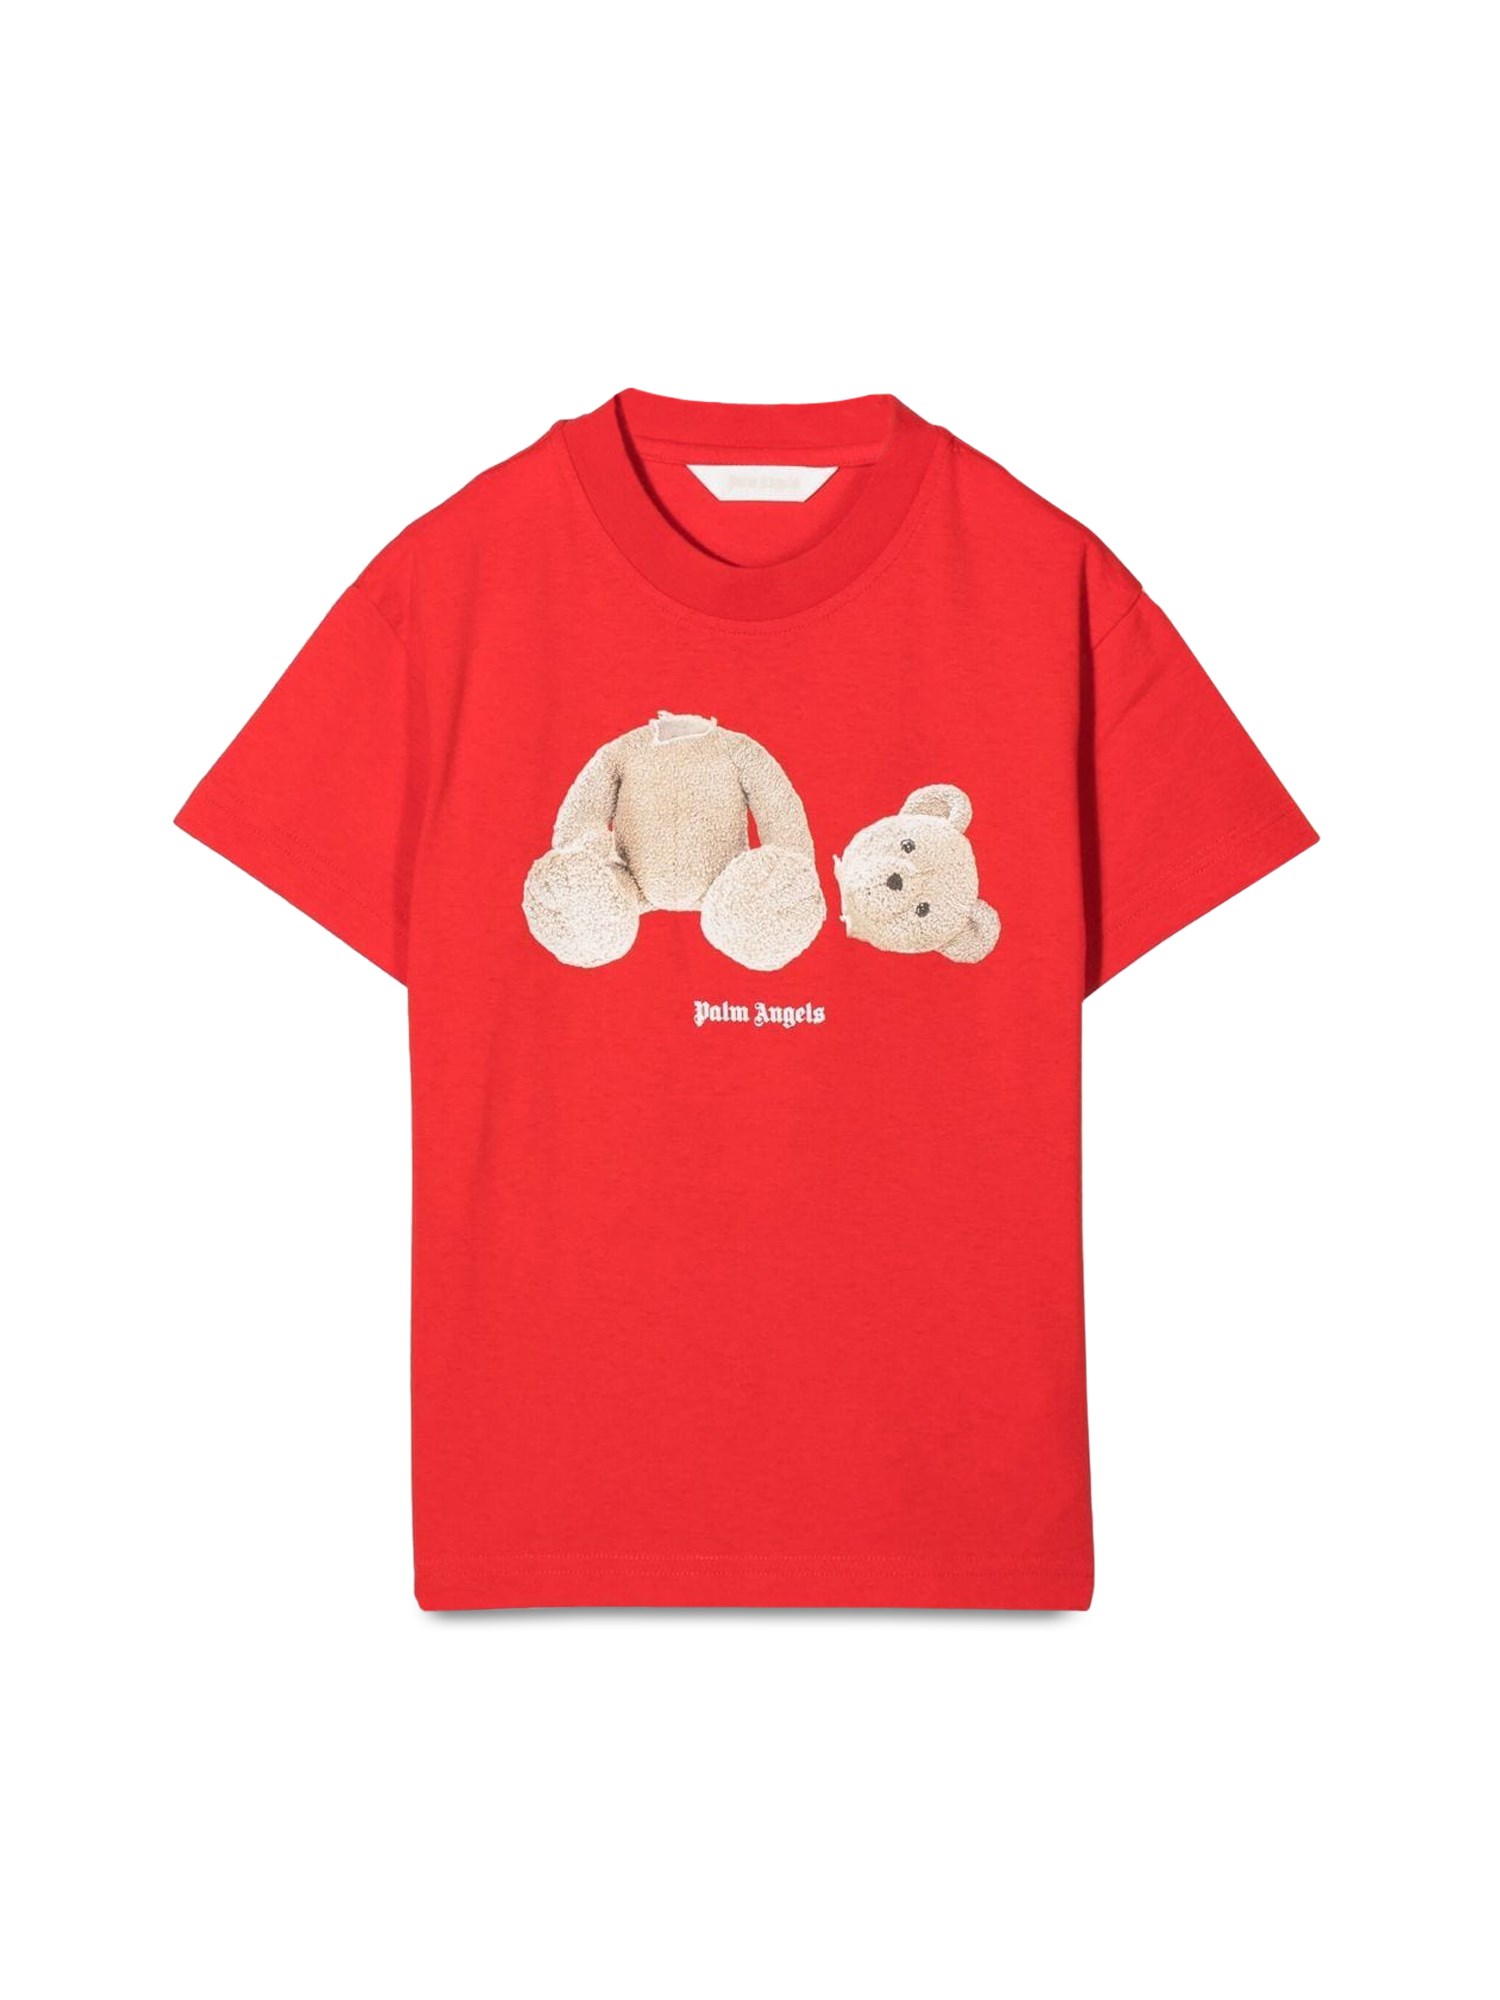 BEAR T-SHIRT in red - Palm Angels® Official